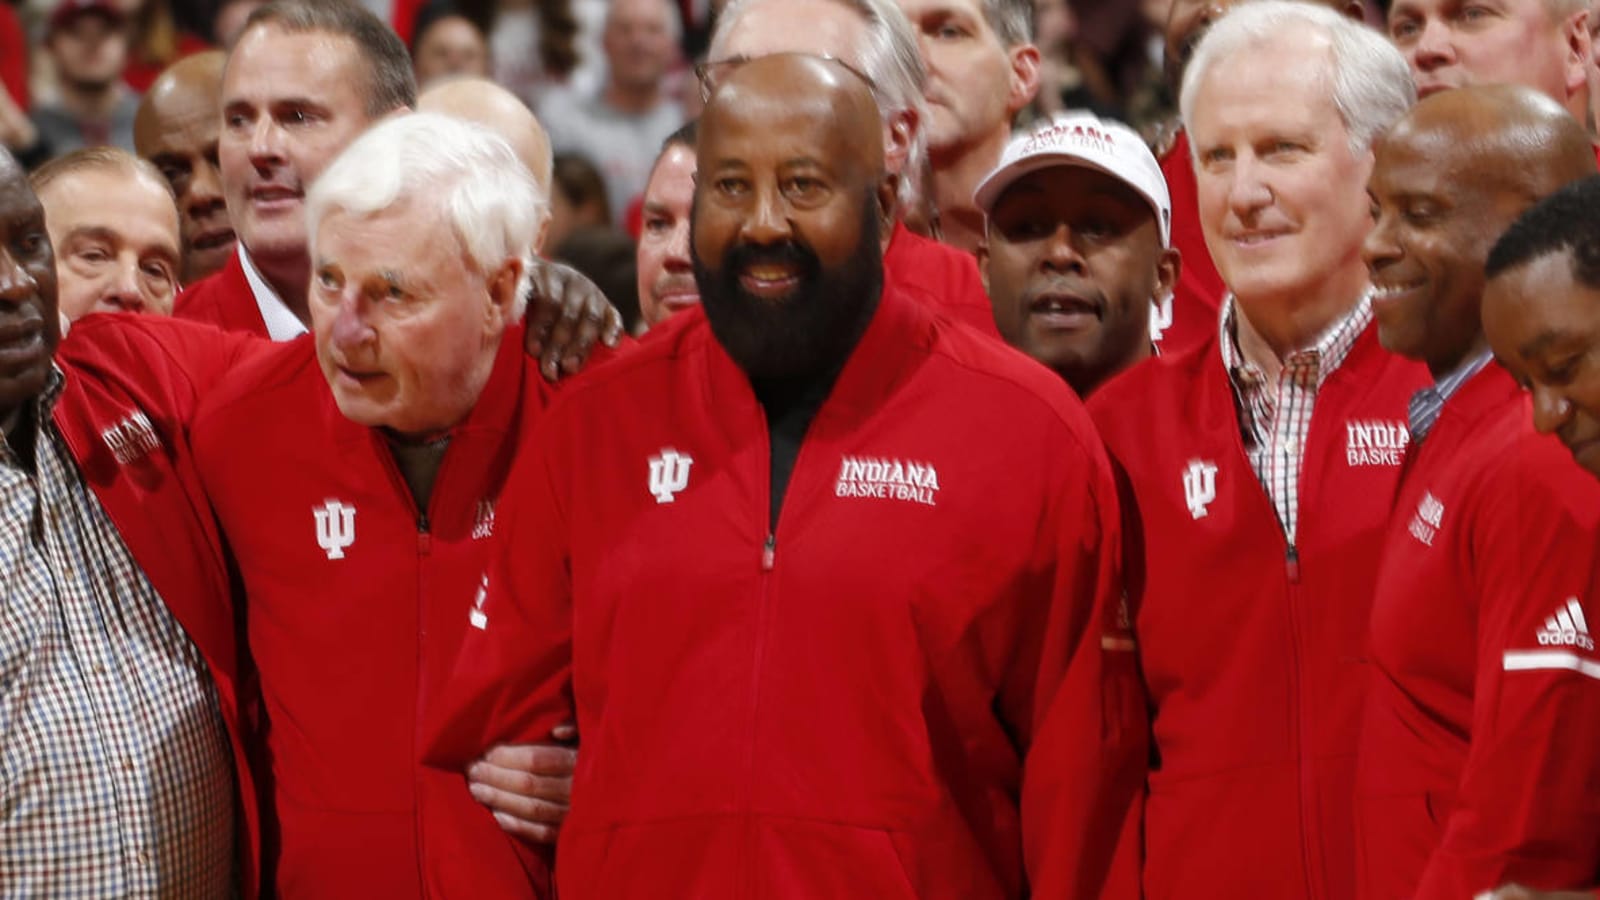 Mike Woodson expected to be named Indiana HC